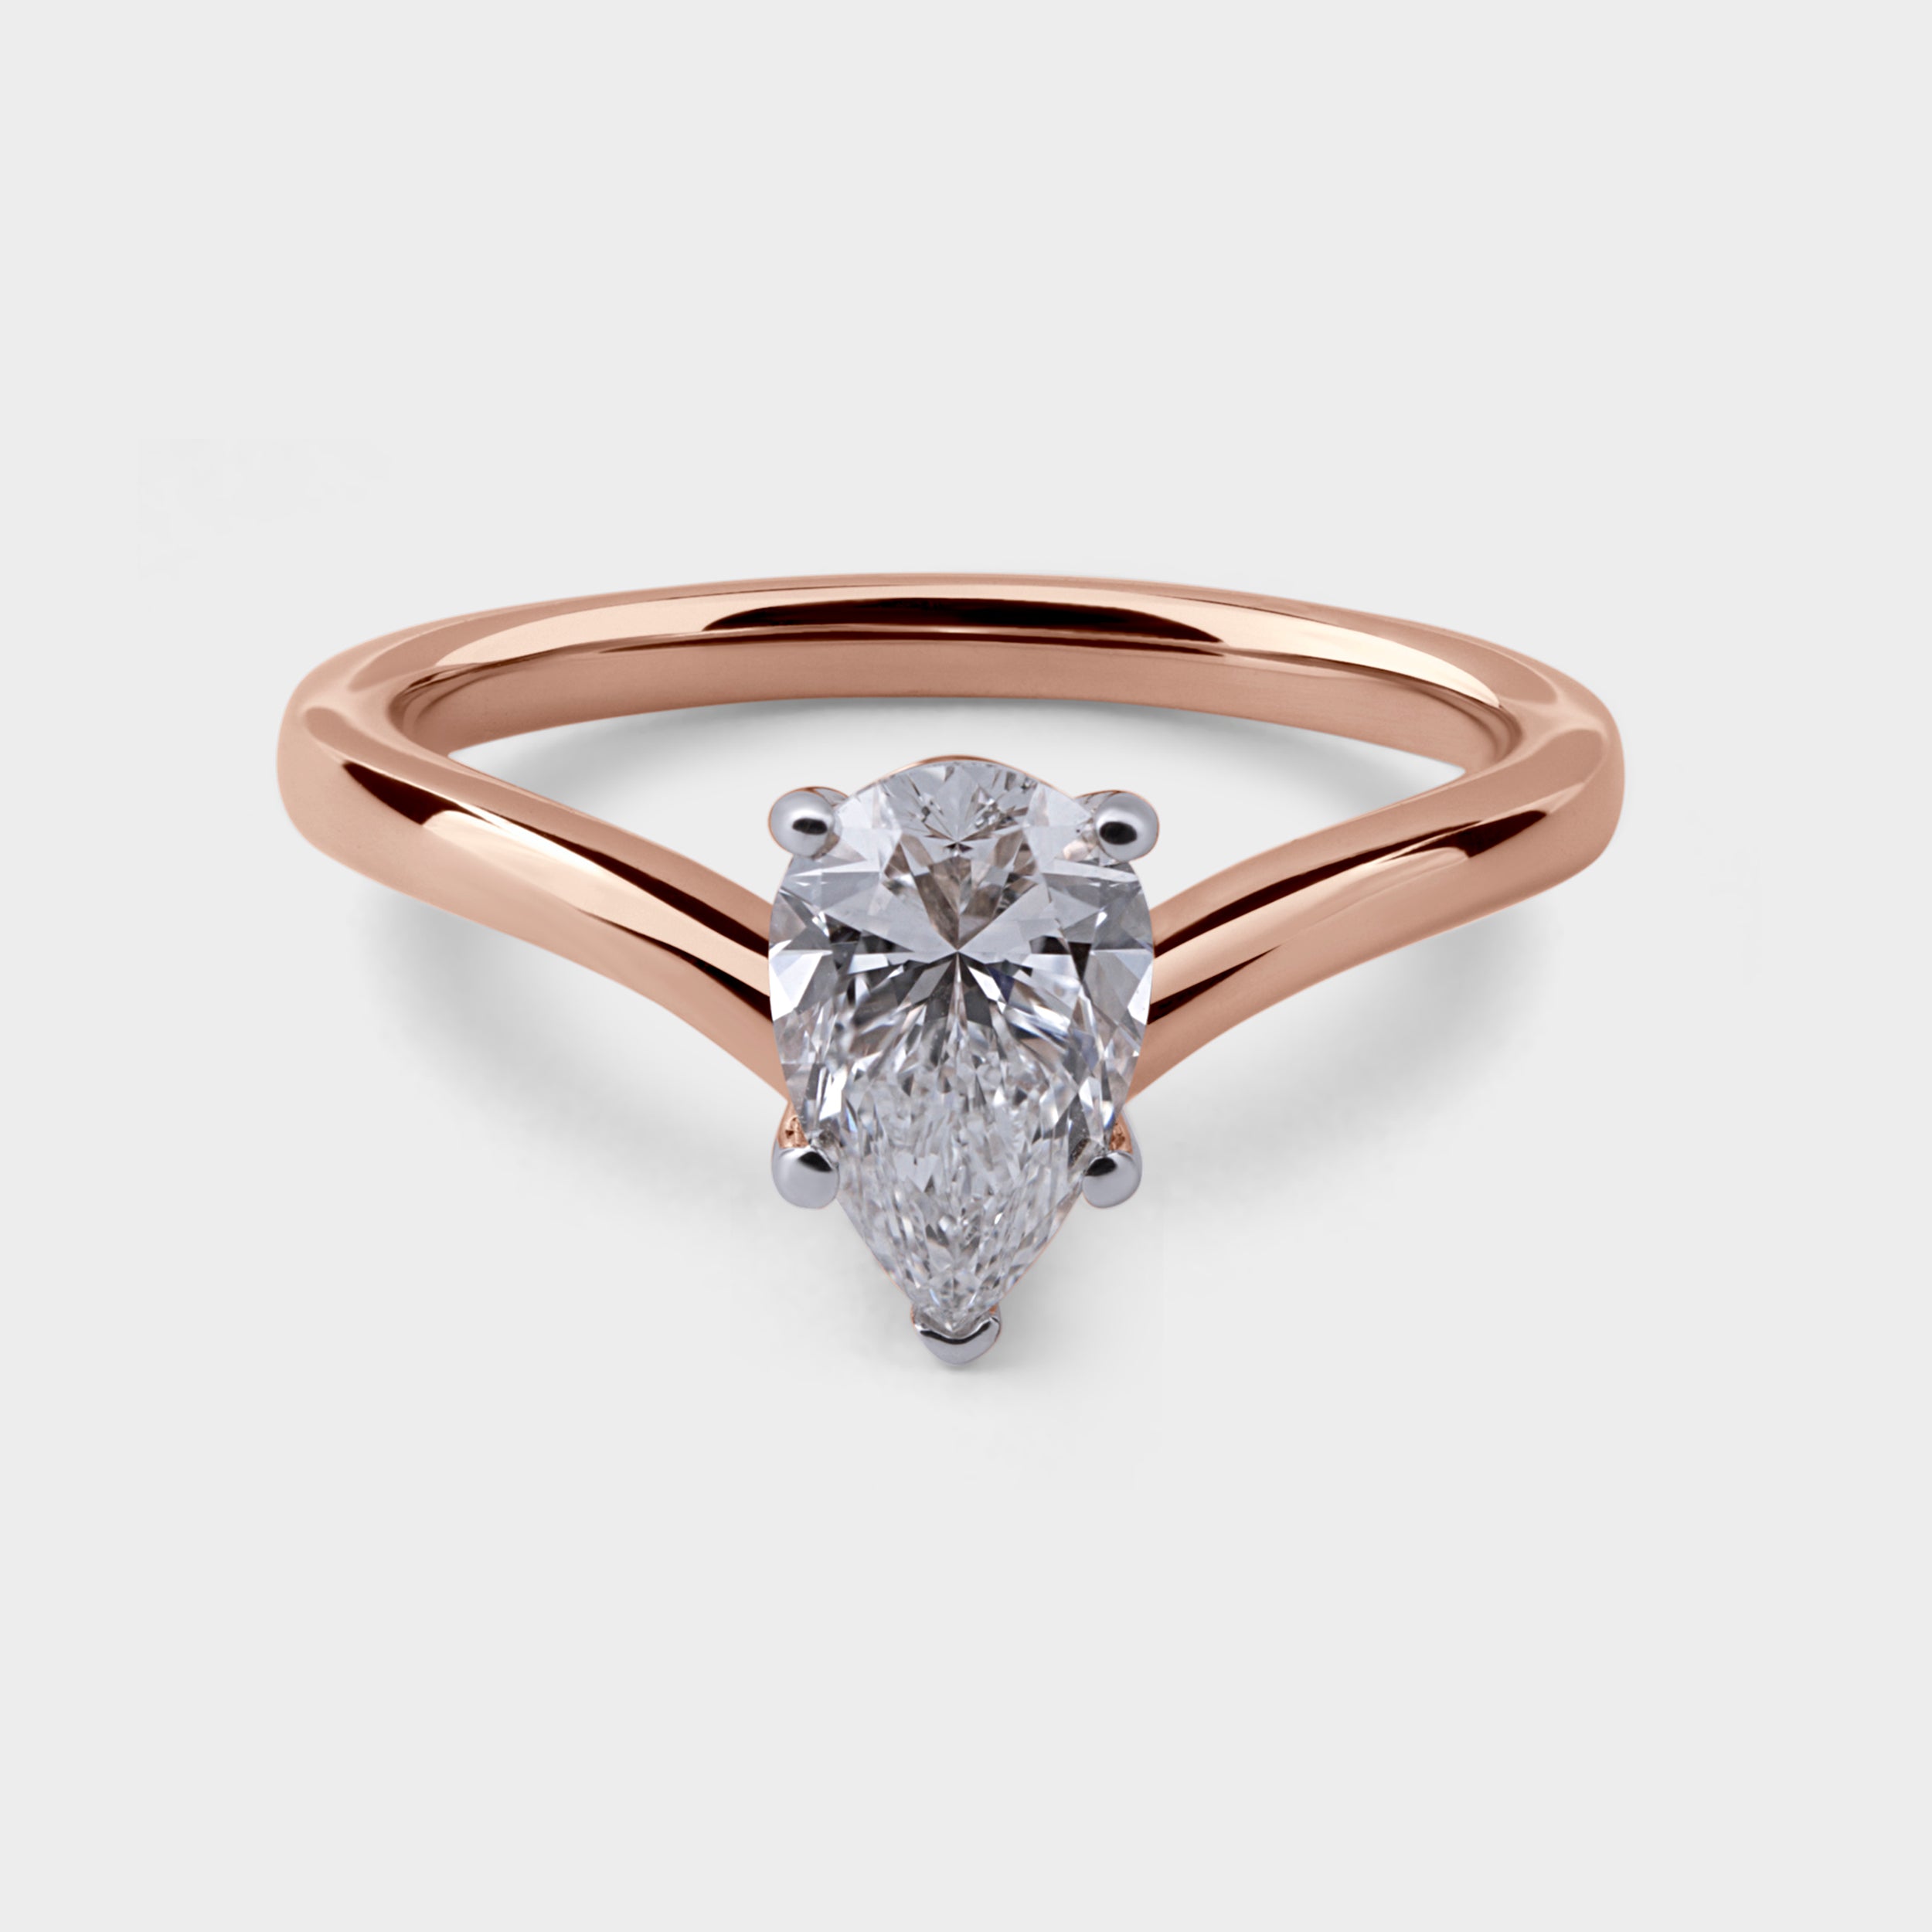 Pear-Shaped 1.01 Carat Lab-Grown Solitaire Diamond Ring in Rose Gold | SKU : 0019828732